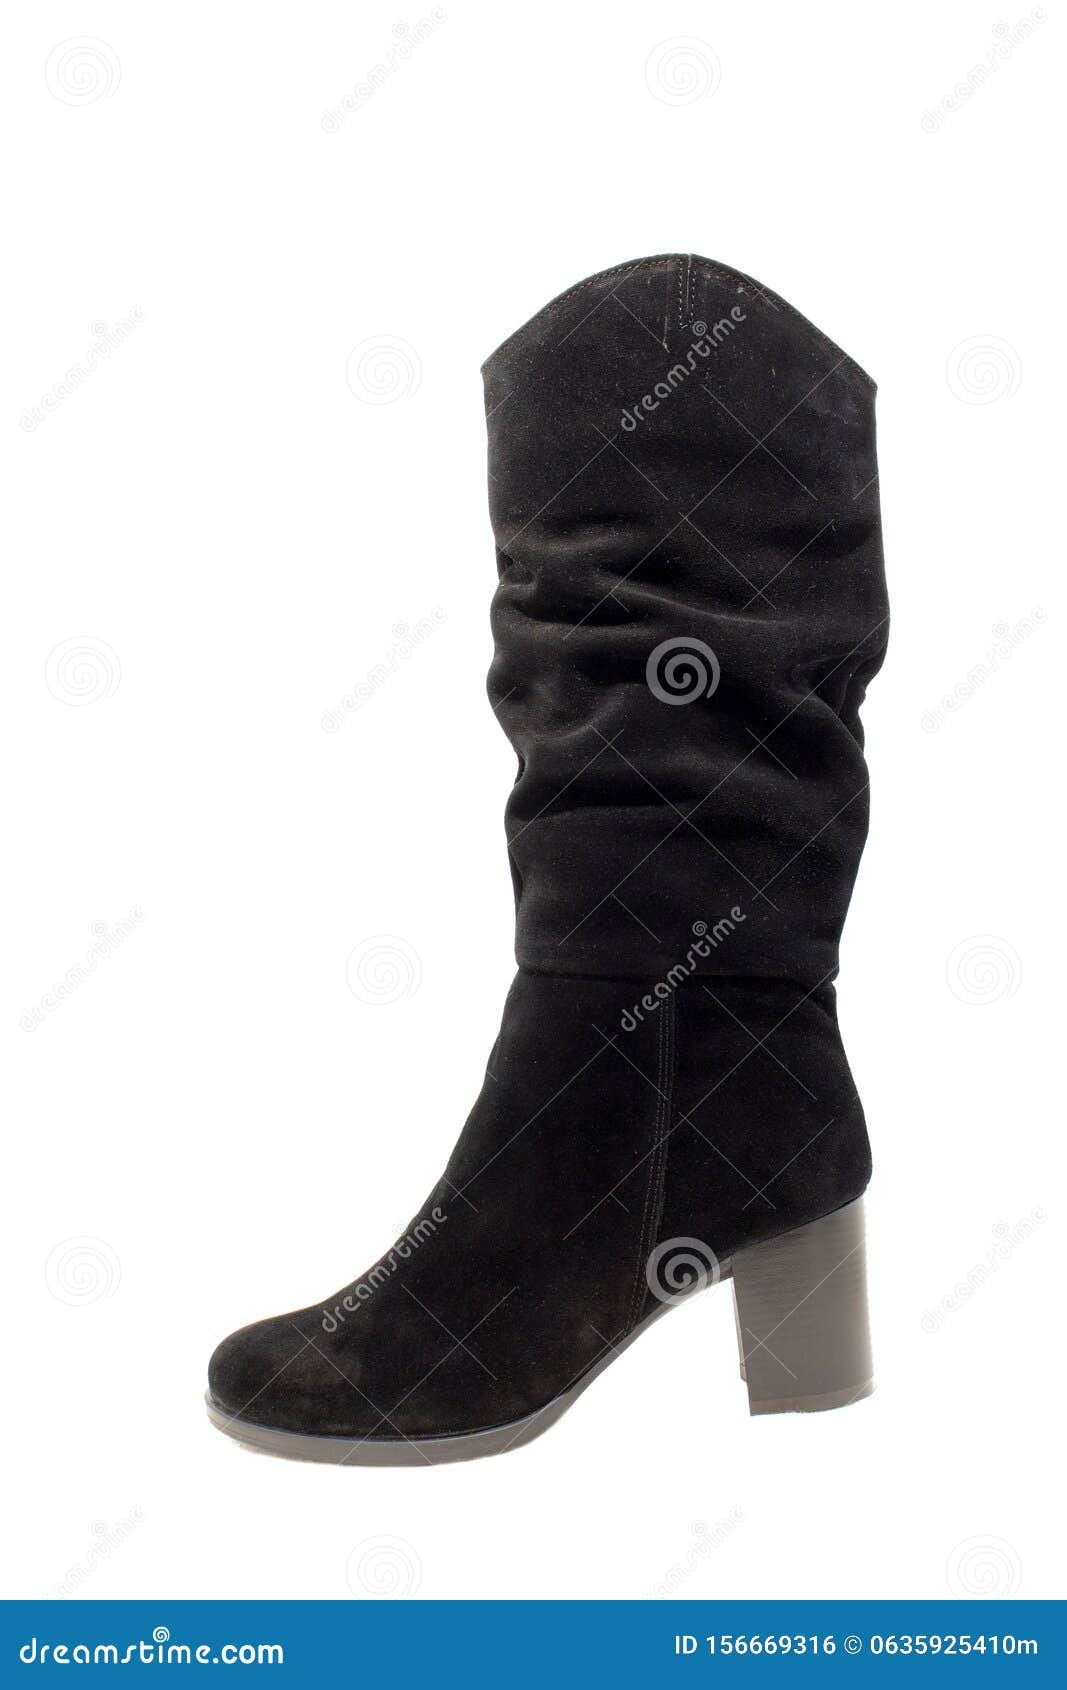 Women`s black boot stock photo. Image of foot, glamour - 156669316